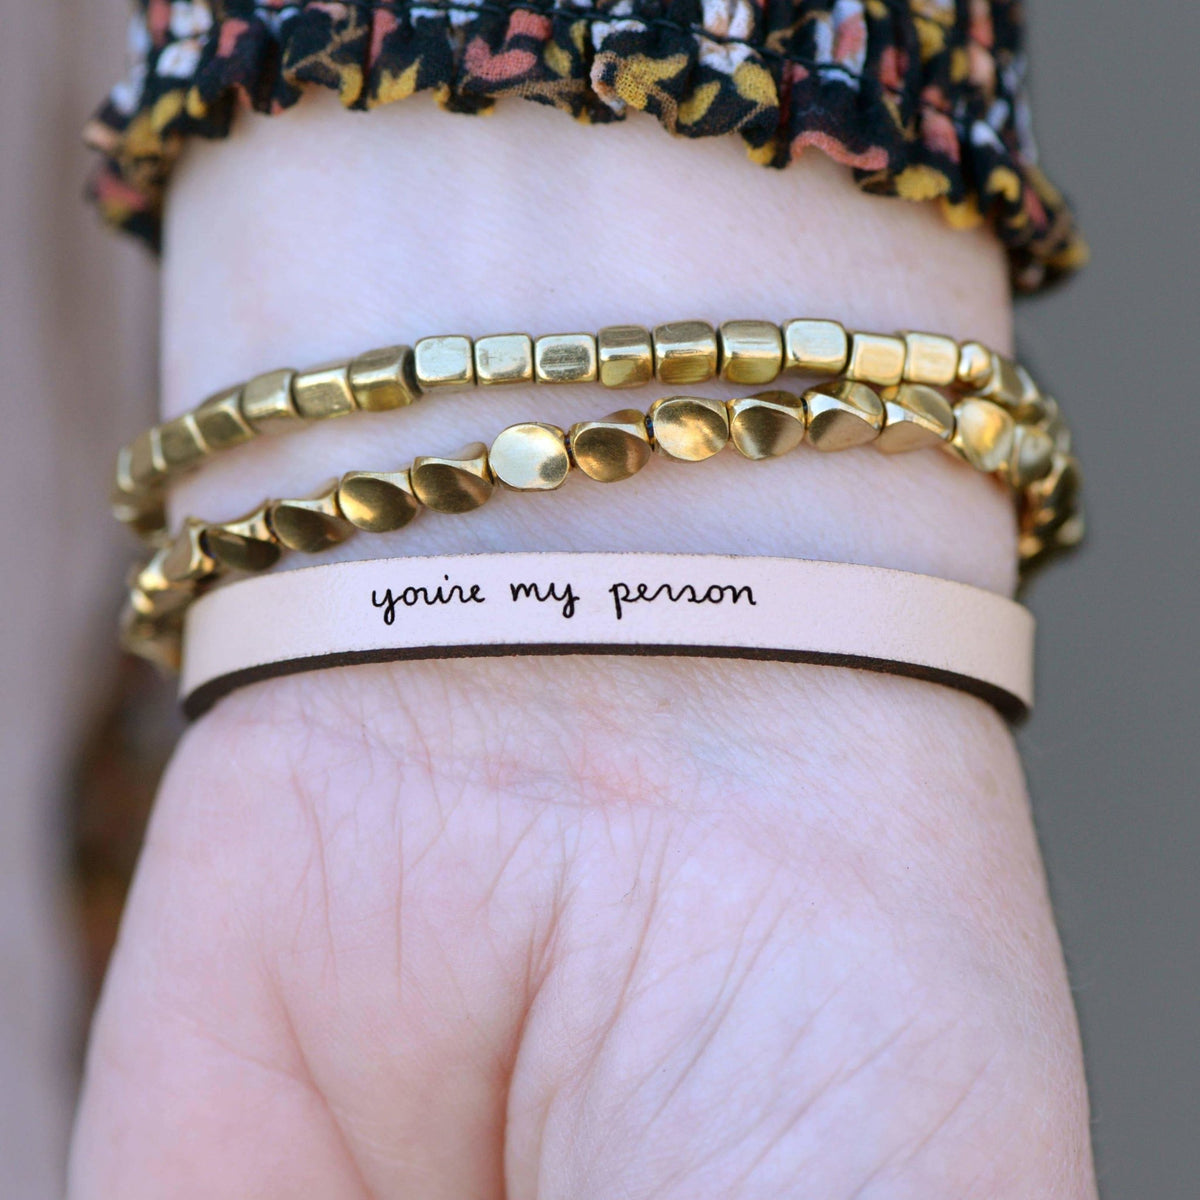 Leather Empowerment Bracelet - you're my person - Metallic Rose Gold - Gift & Gather